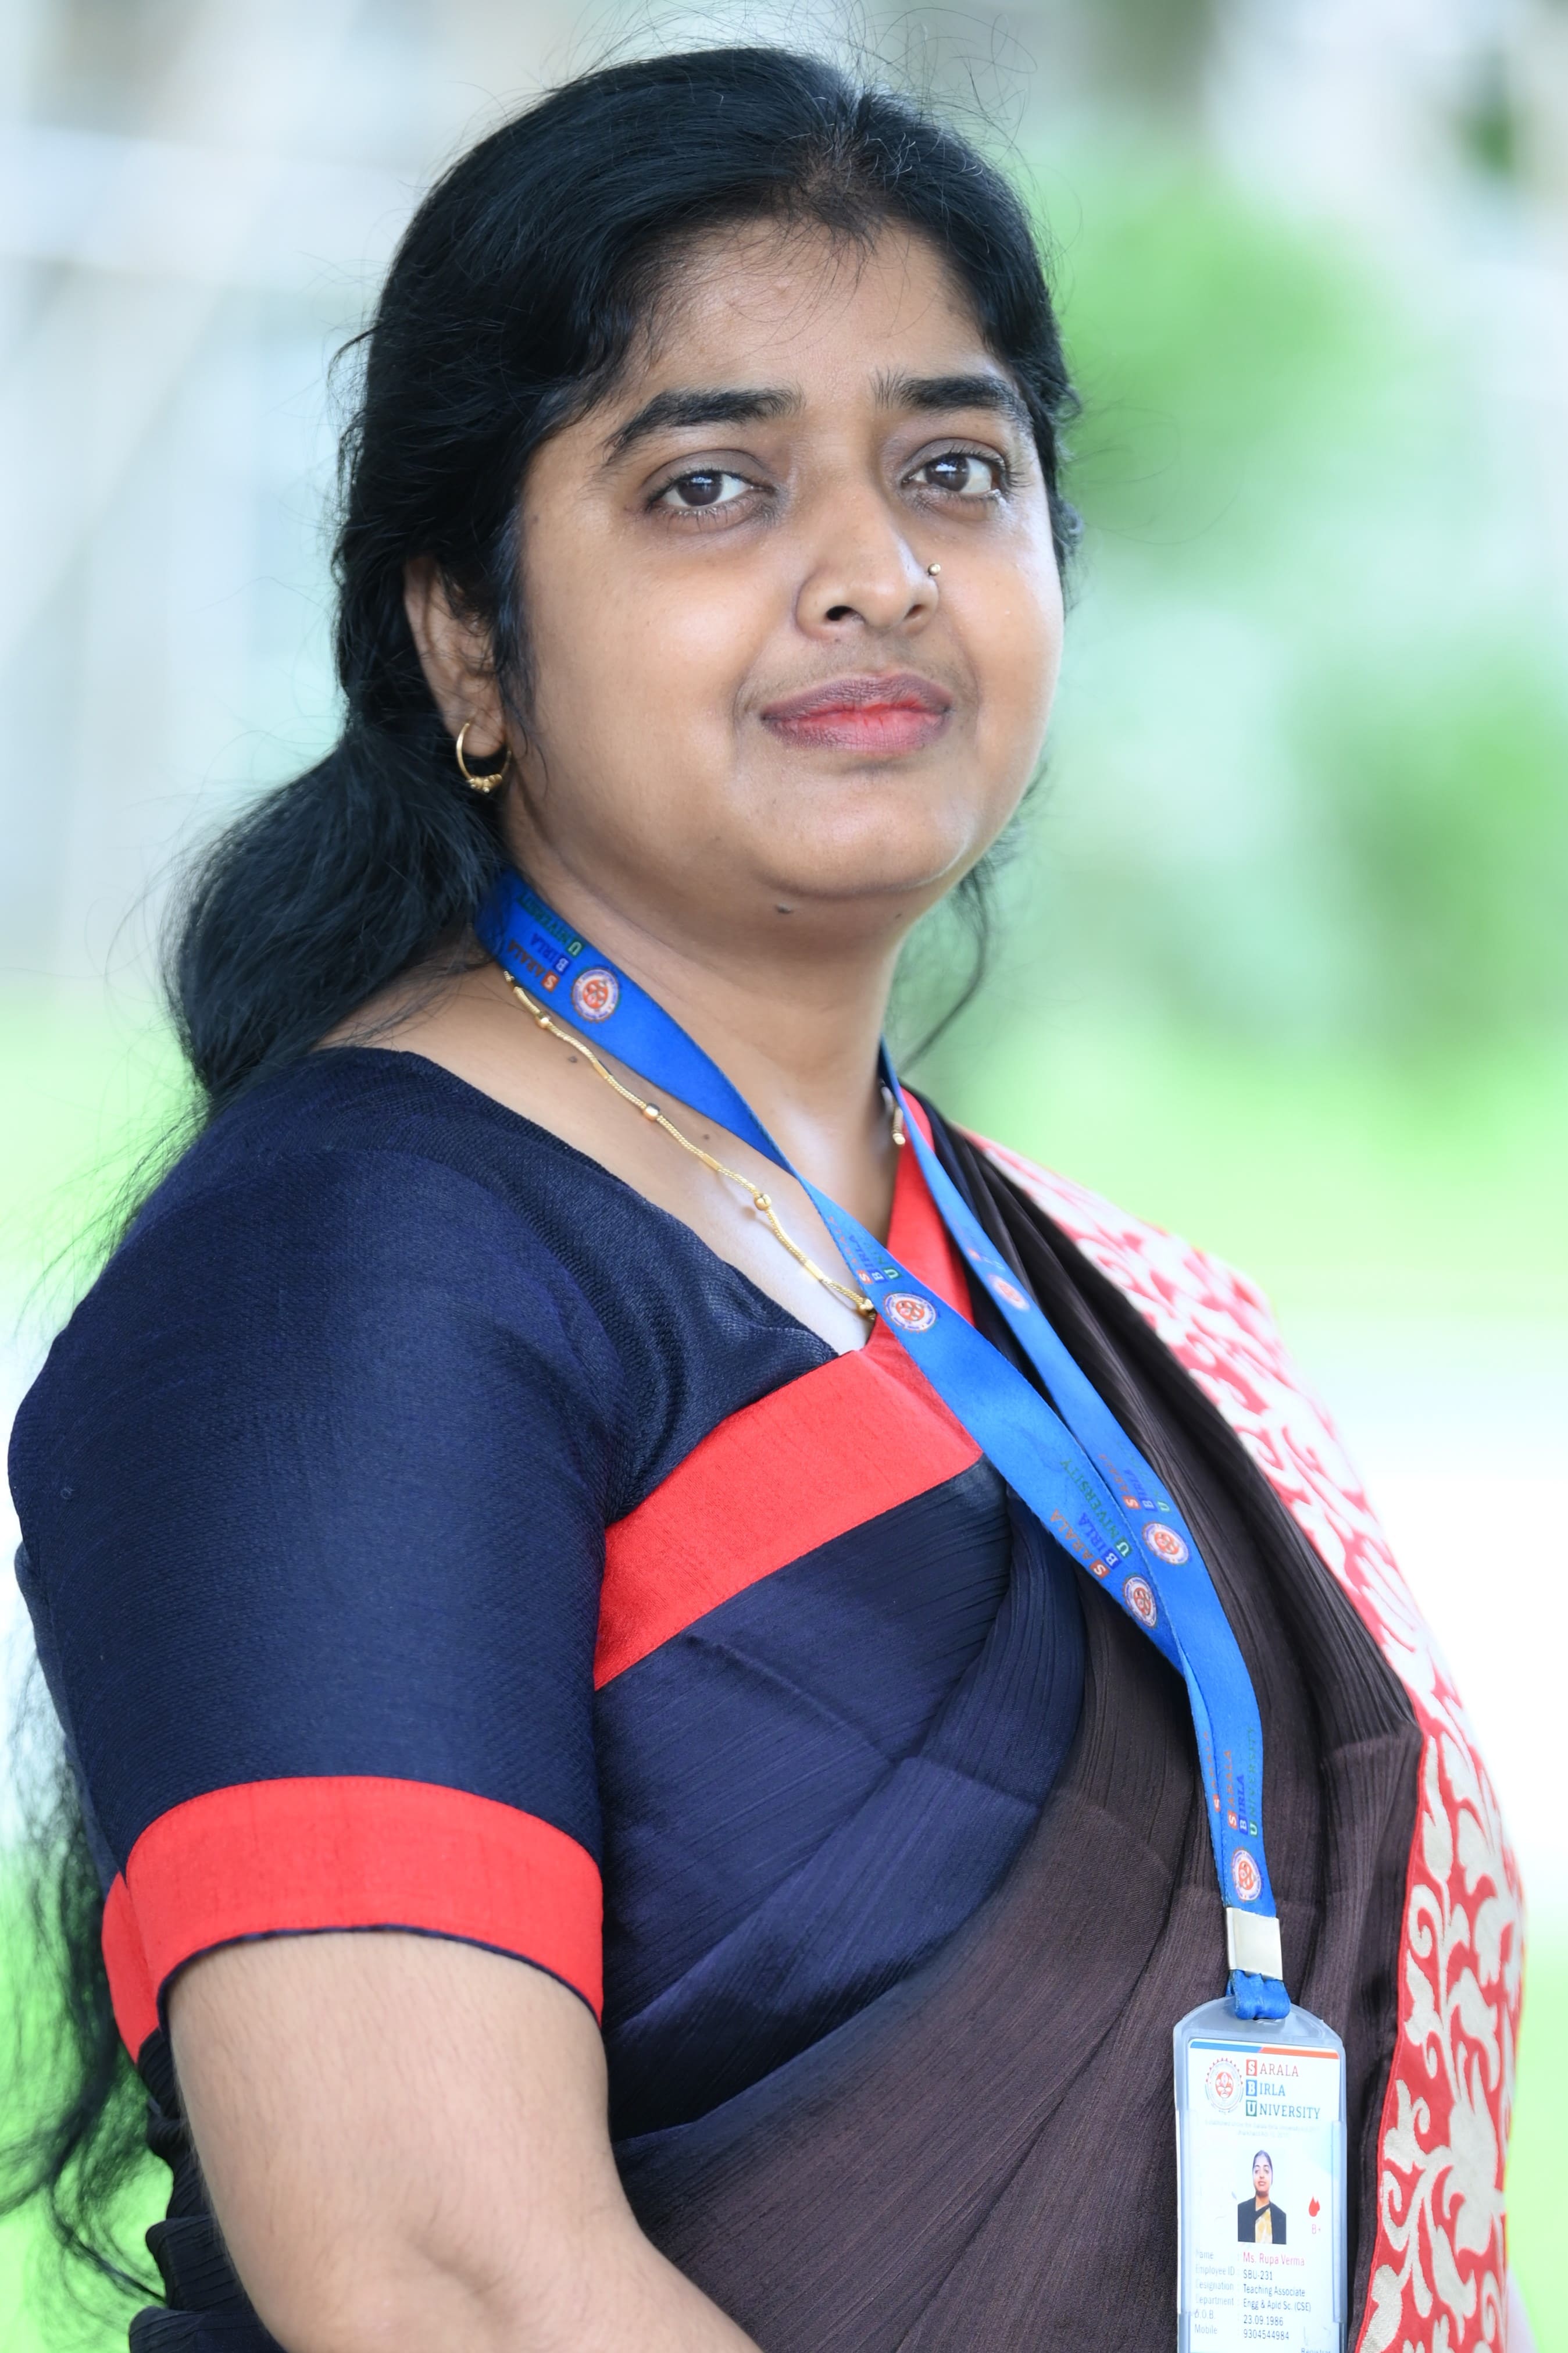 Rupa Mehta - Head of the department of omputer science and